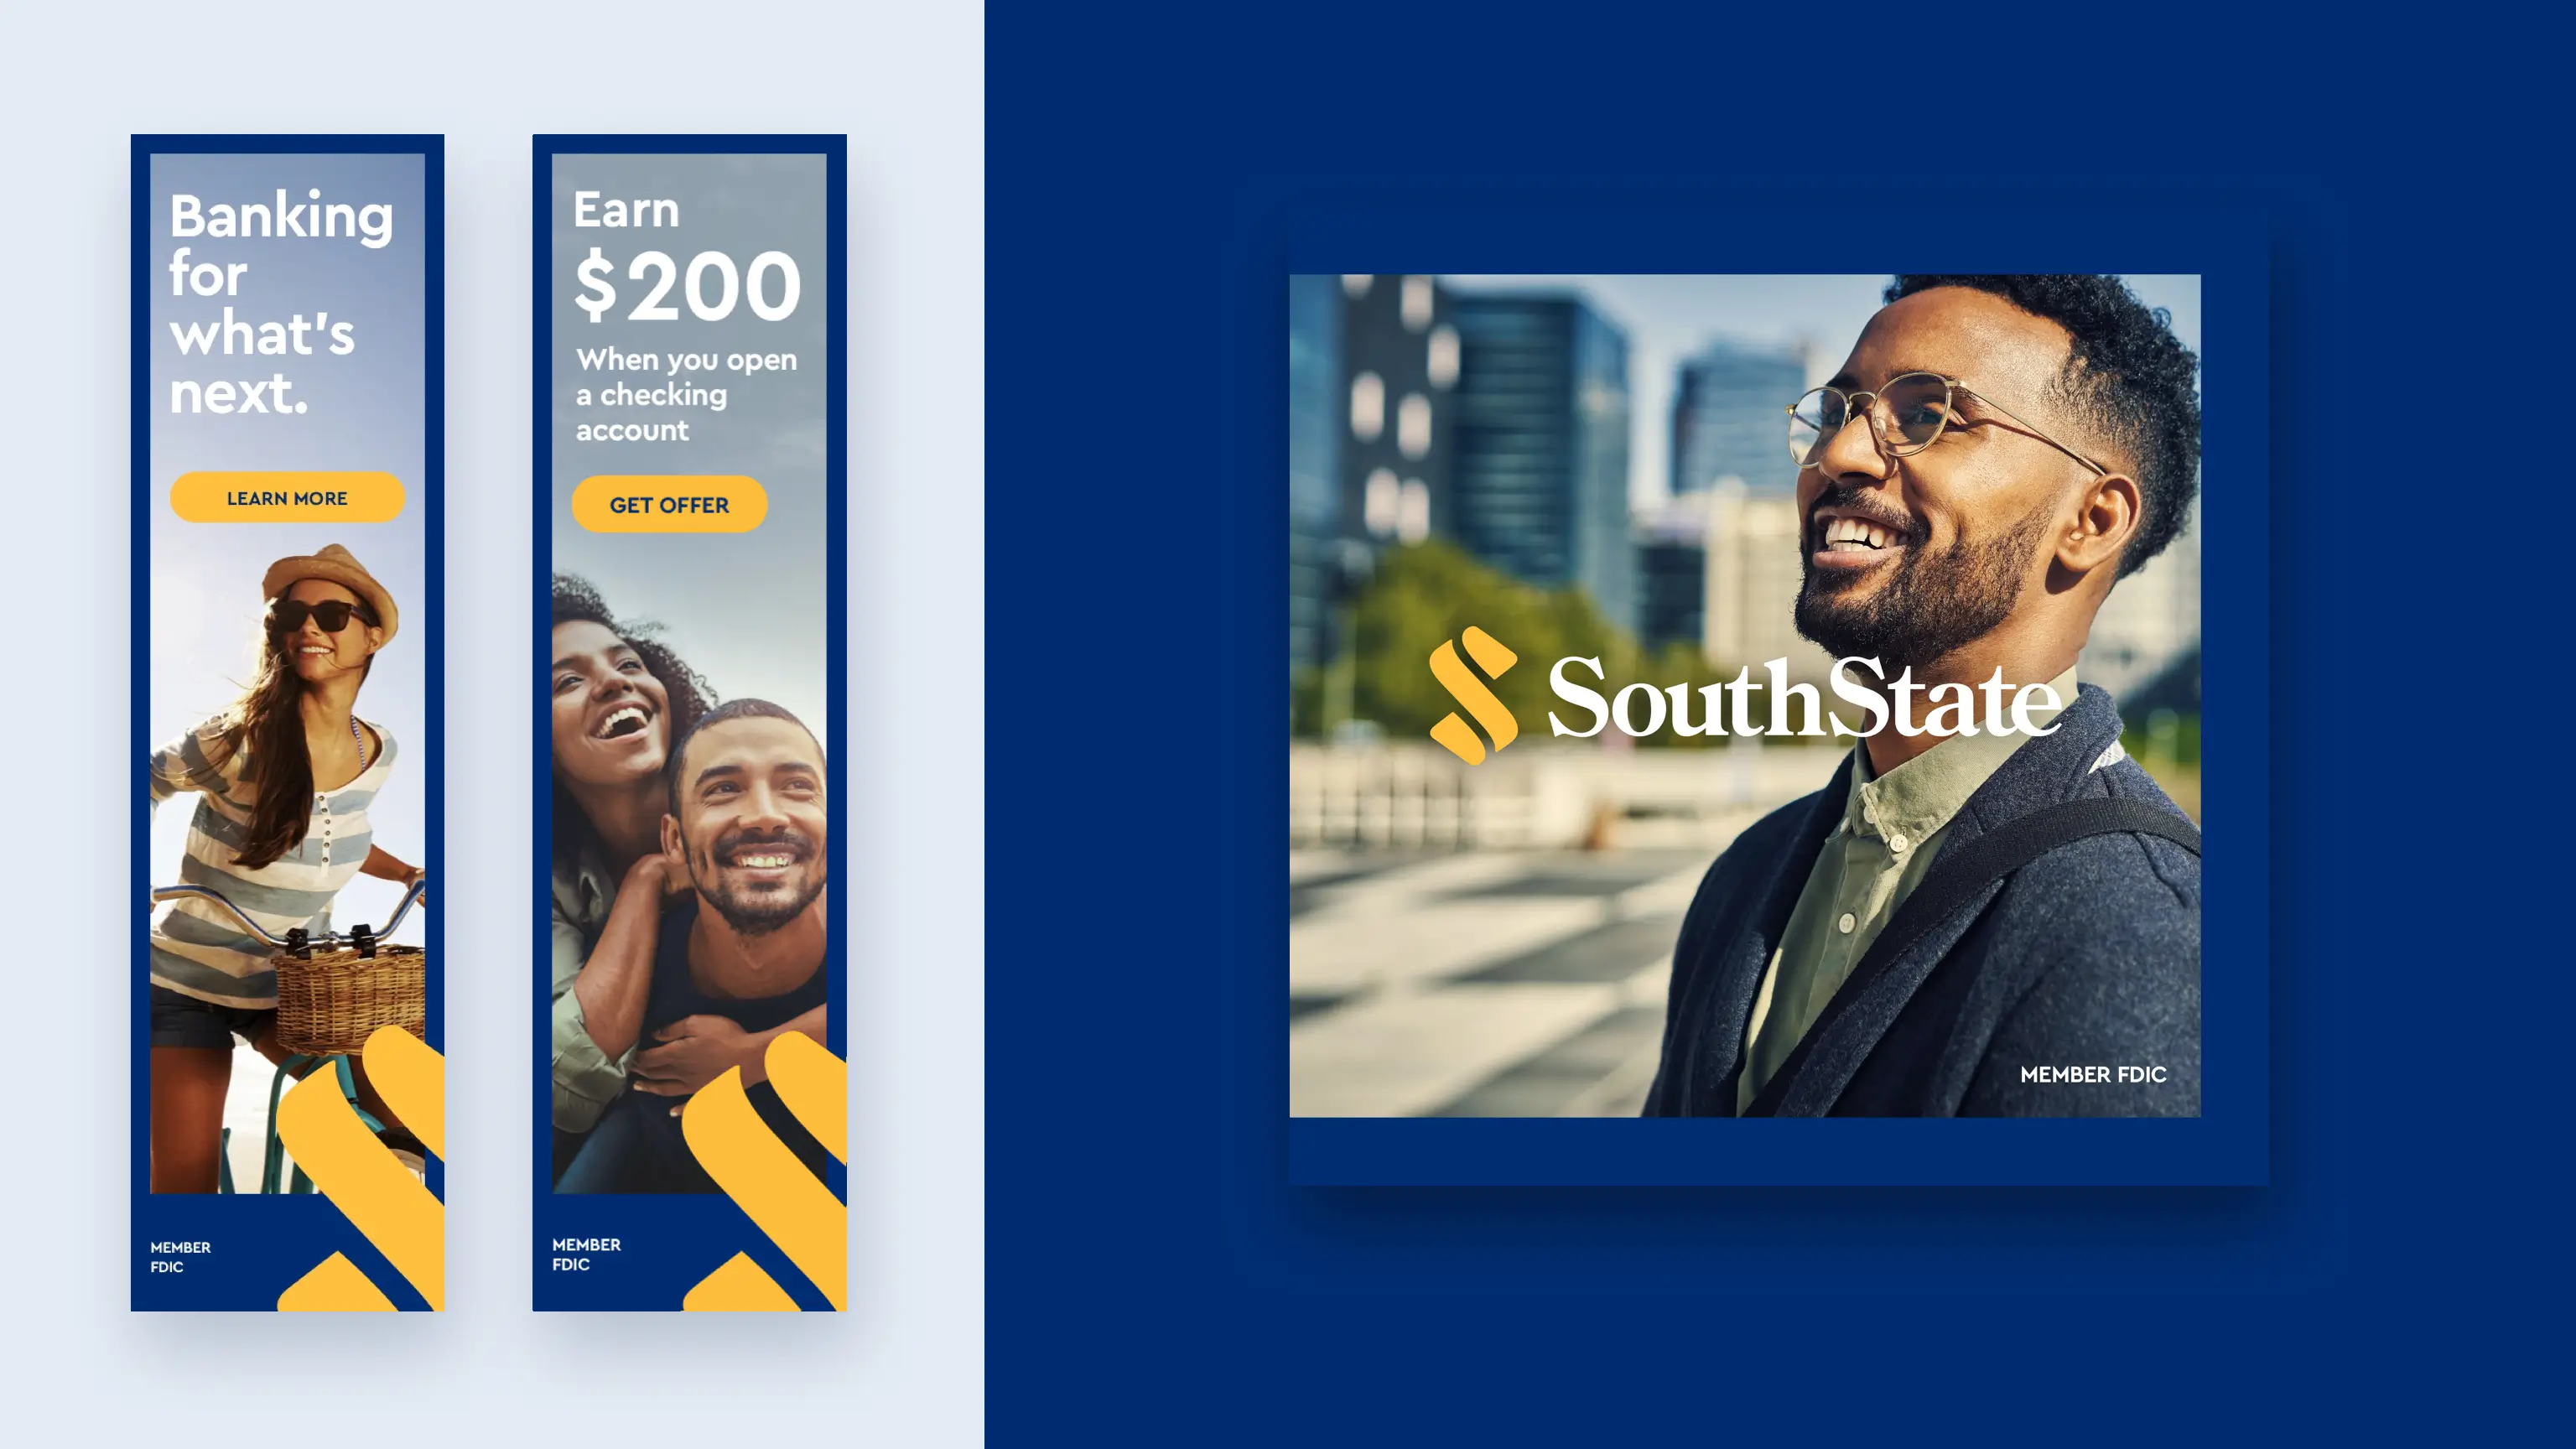 SouthState Bank advertising campaign banners.